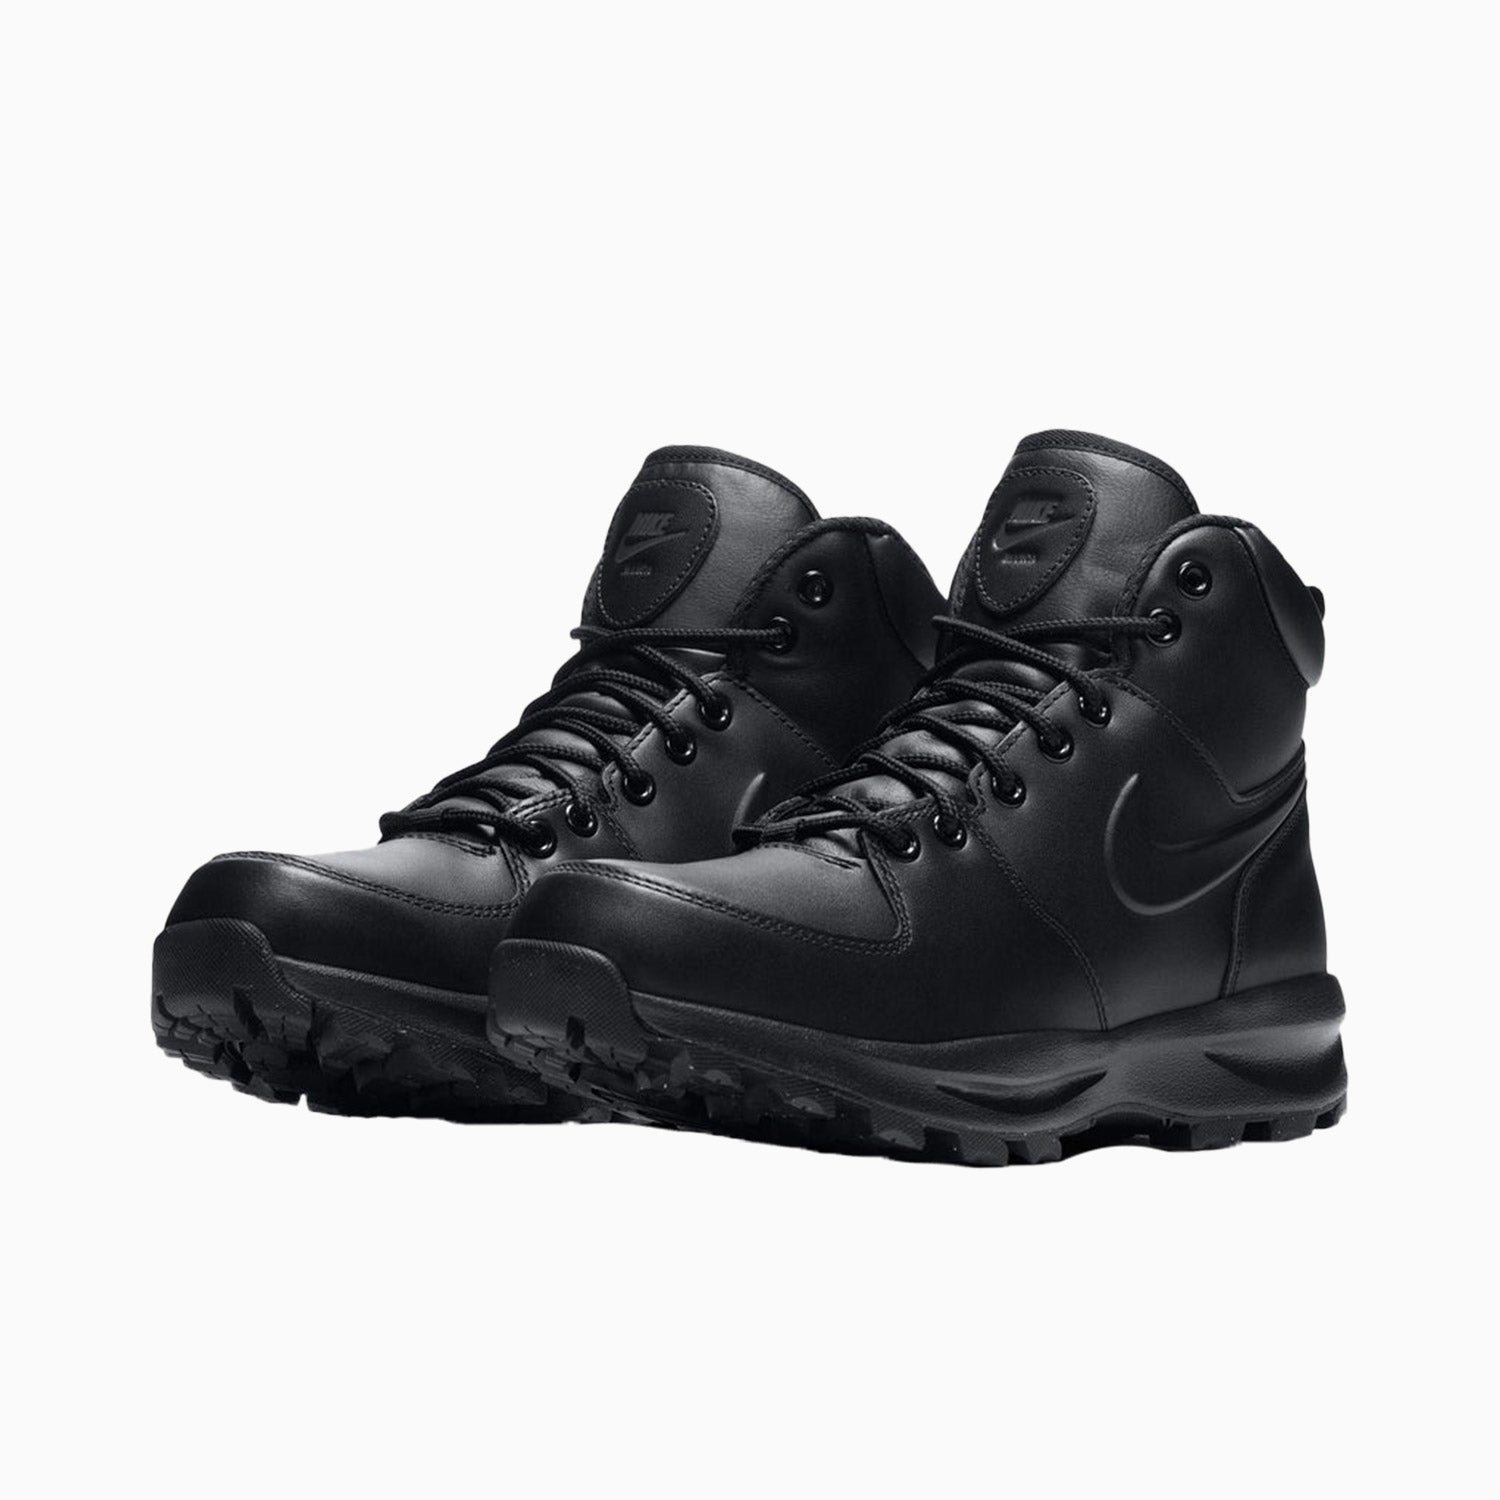 nike-mens-manao-leather-boot-454350-003